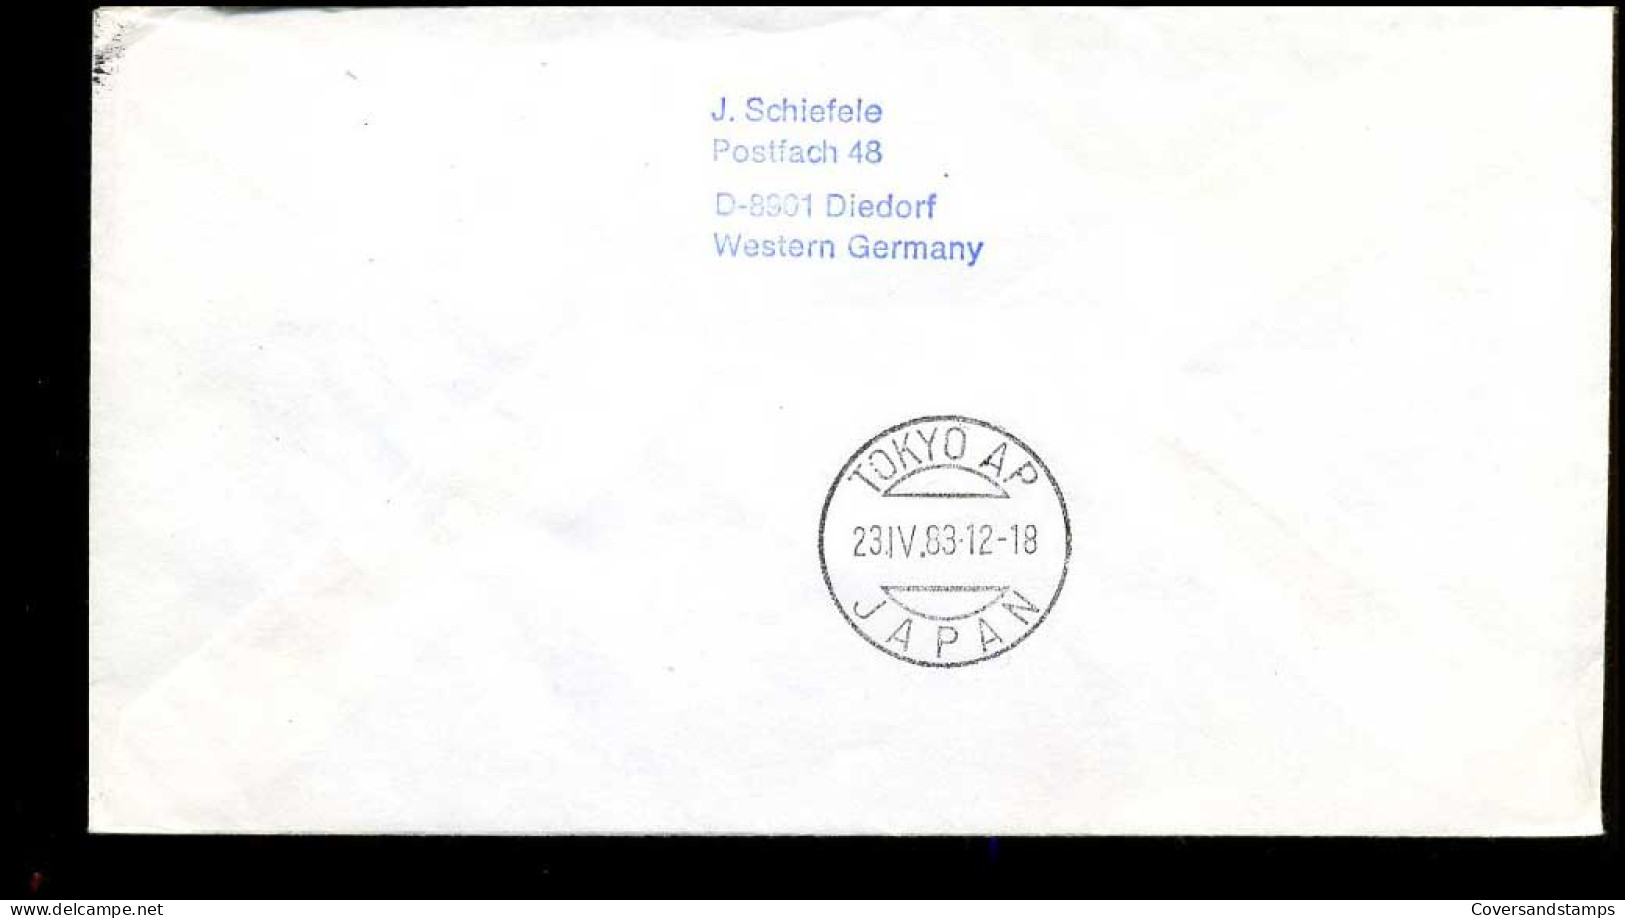 Finland - Cover To Tokyo, Japan - Covers & Documents